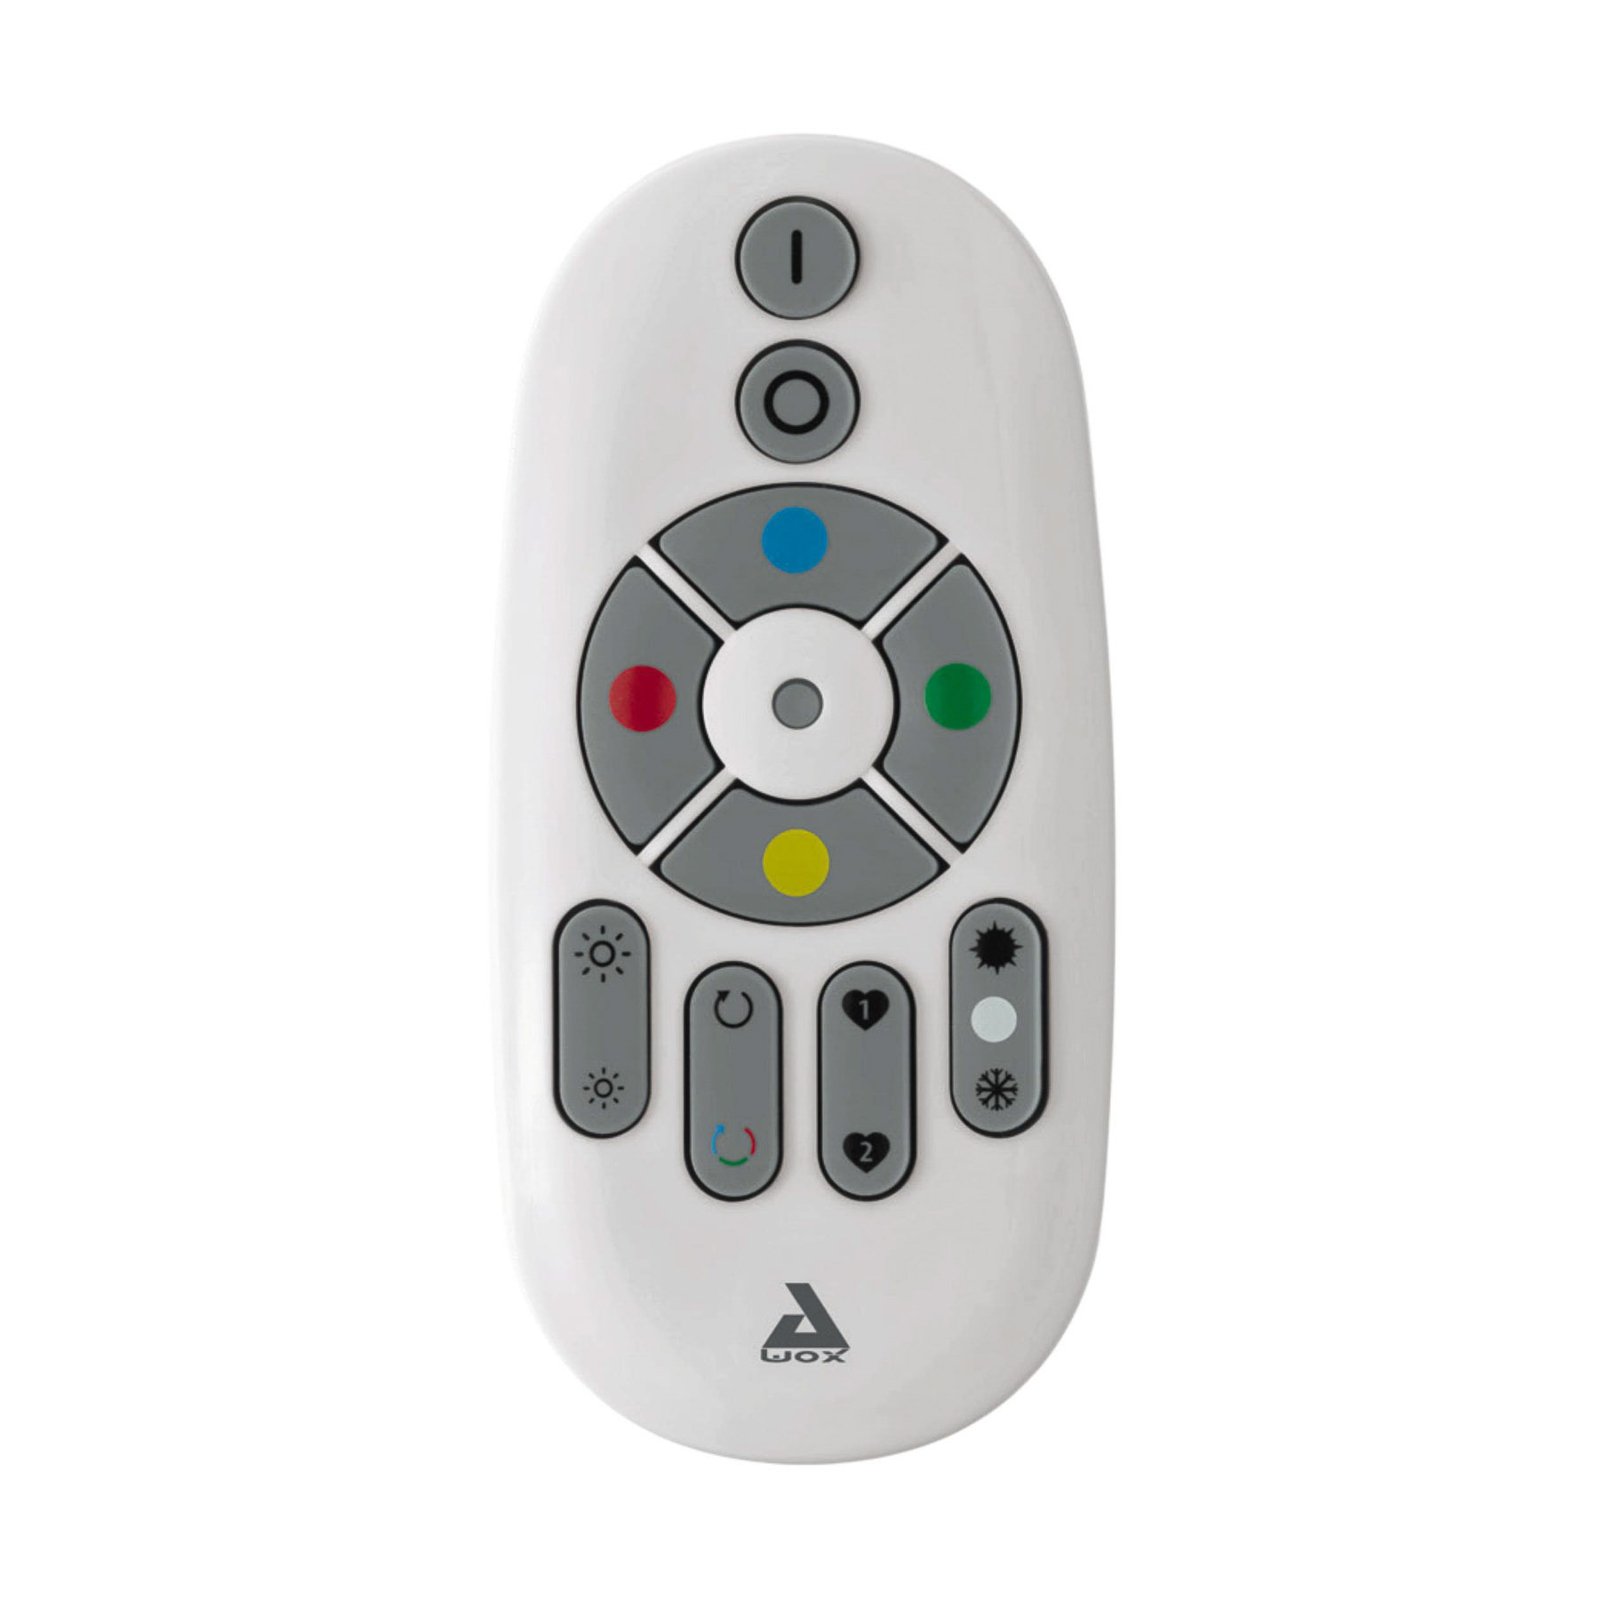 EGLO connect-z remote control with a wall mount